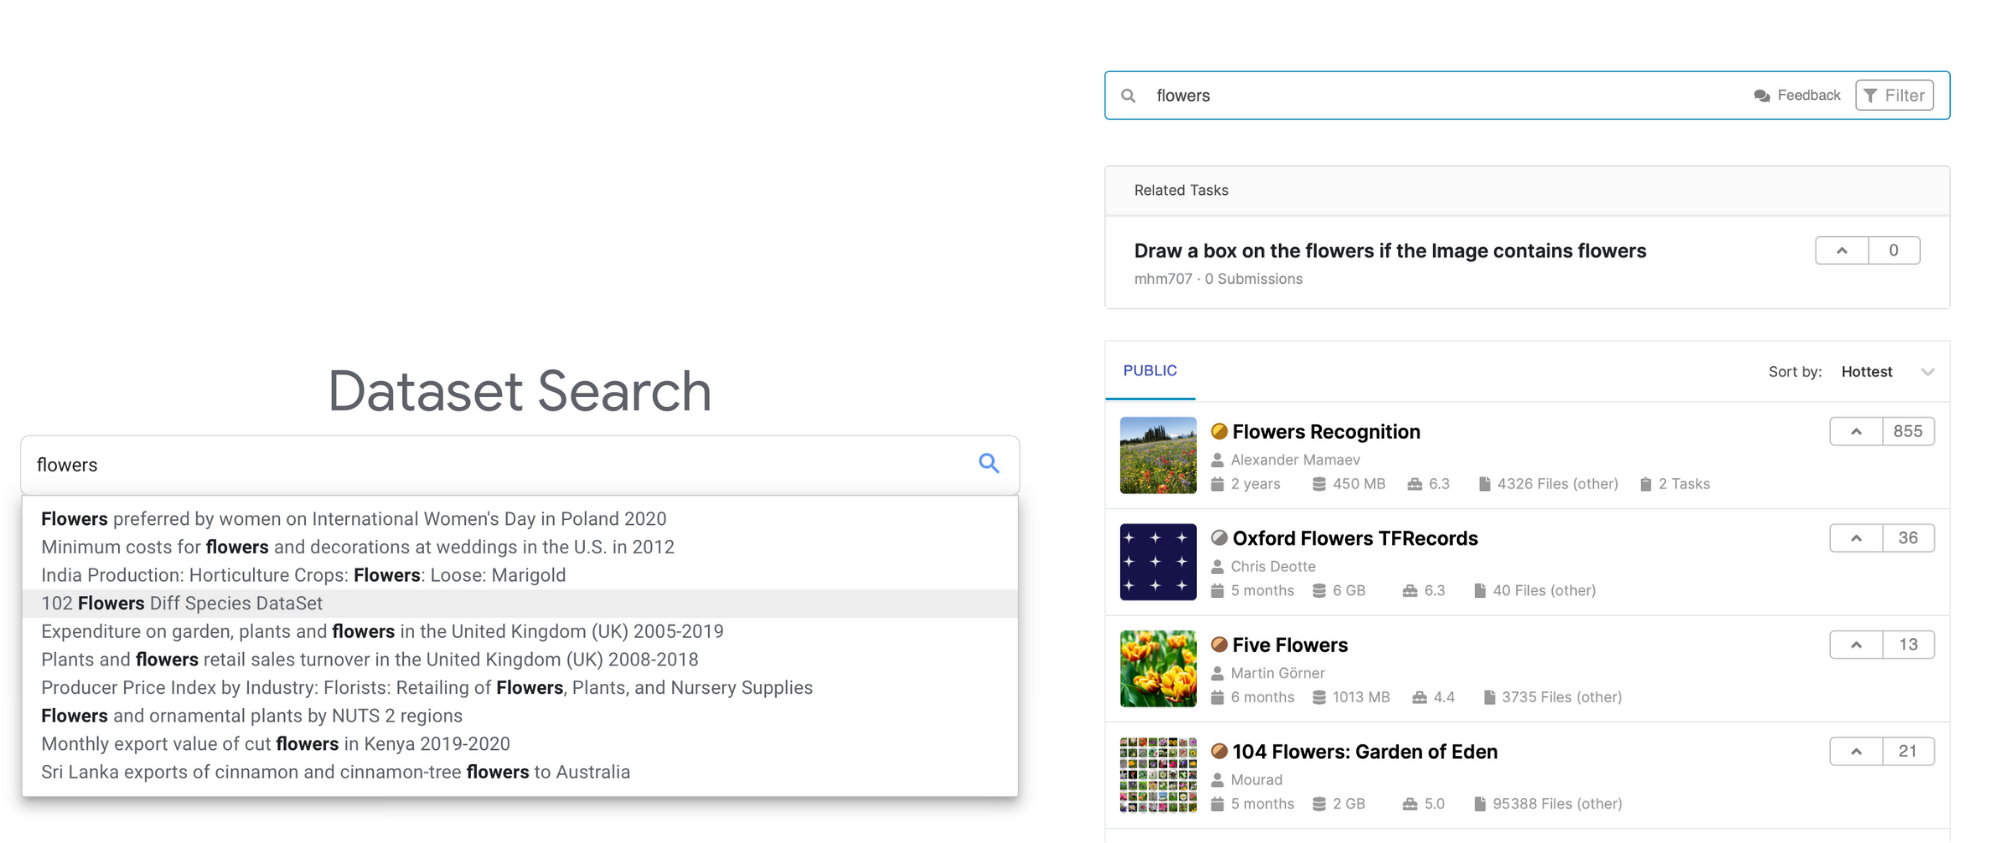 There are two images, which are screenshots of dataset search results for the word “flowers.” They show how your dataset search results may vary. On the left is a Google Dataset Search, which previews datasets from various time periods relating to plants and flowers in Poland, the U.S., the United Kingdom, Kenya, and Australia. On the right is a Kaggle search, which previews datasets and thumbnail images titled “flowers recognition,” “Oxford Flowers TFRecords,” “Five Flowers,” and “104 Flowers: Garden of Eden.